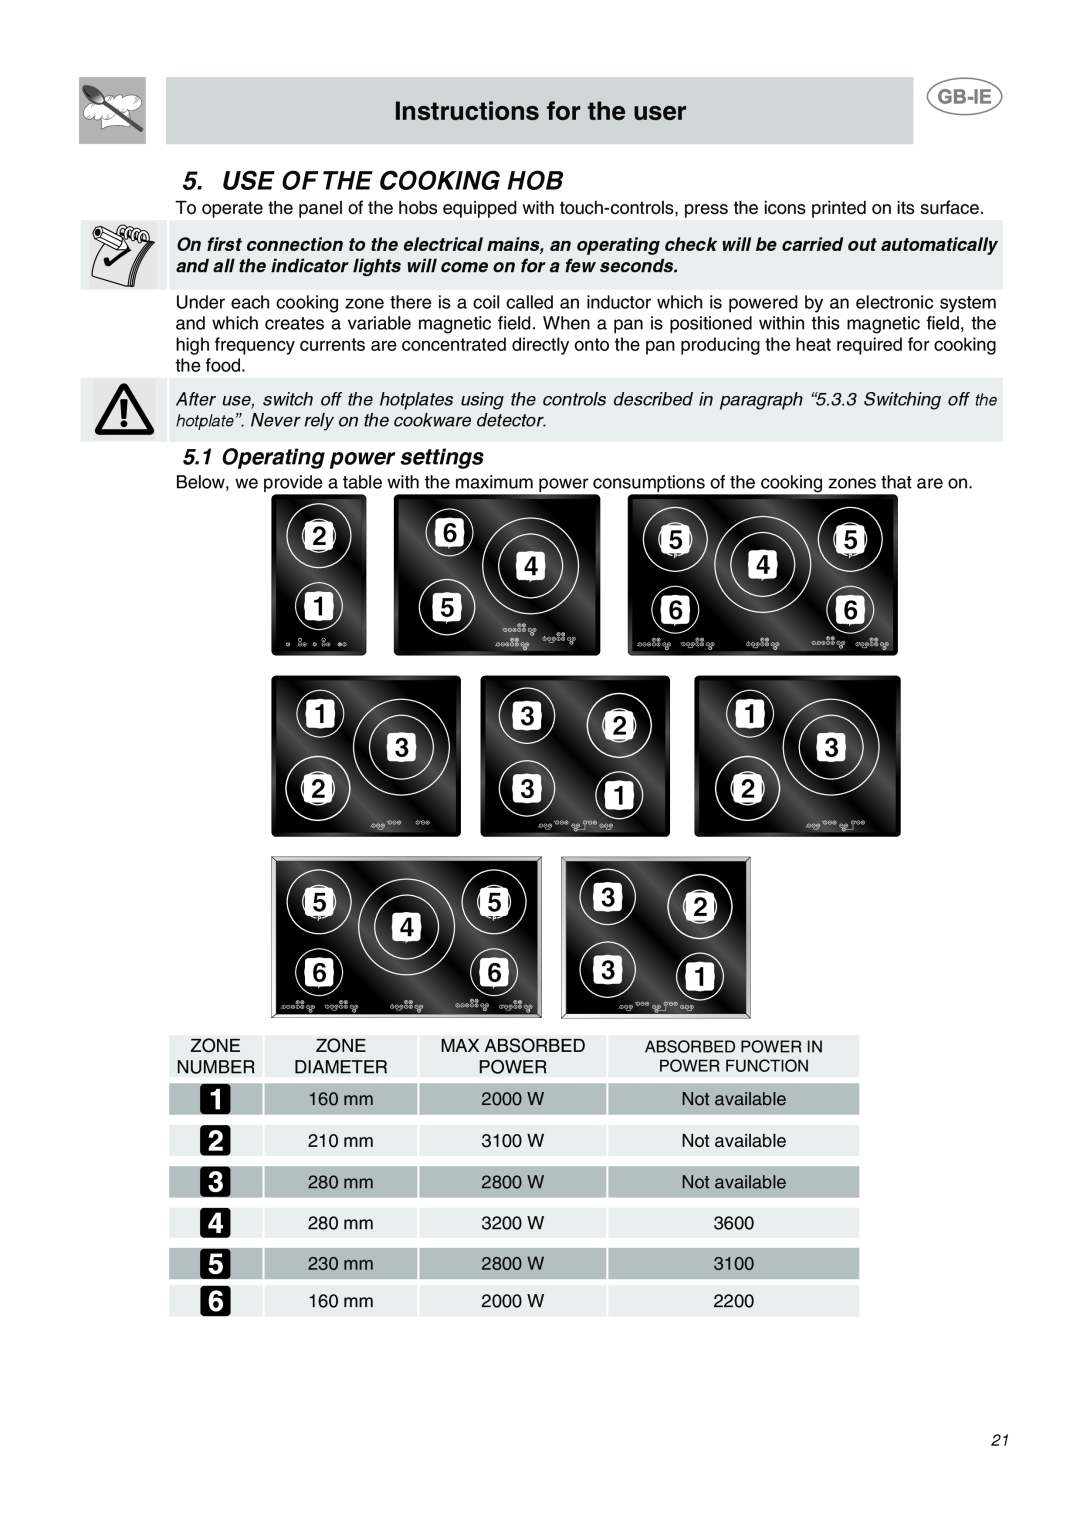 Smeg SE2631ID1, SE2320ID1 manual Use Of The Cooking Hob, Operating power settings, Instructions for the user 